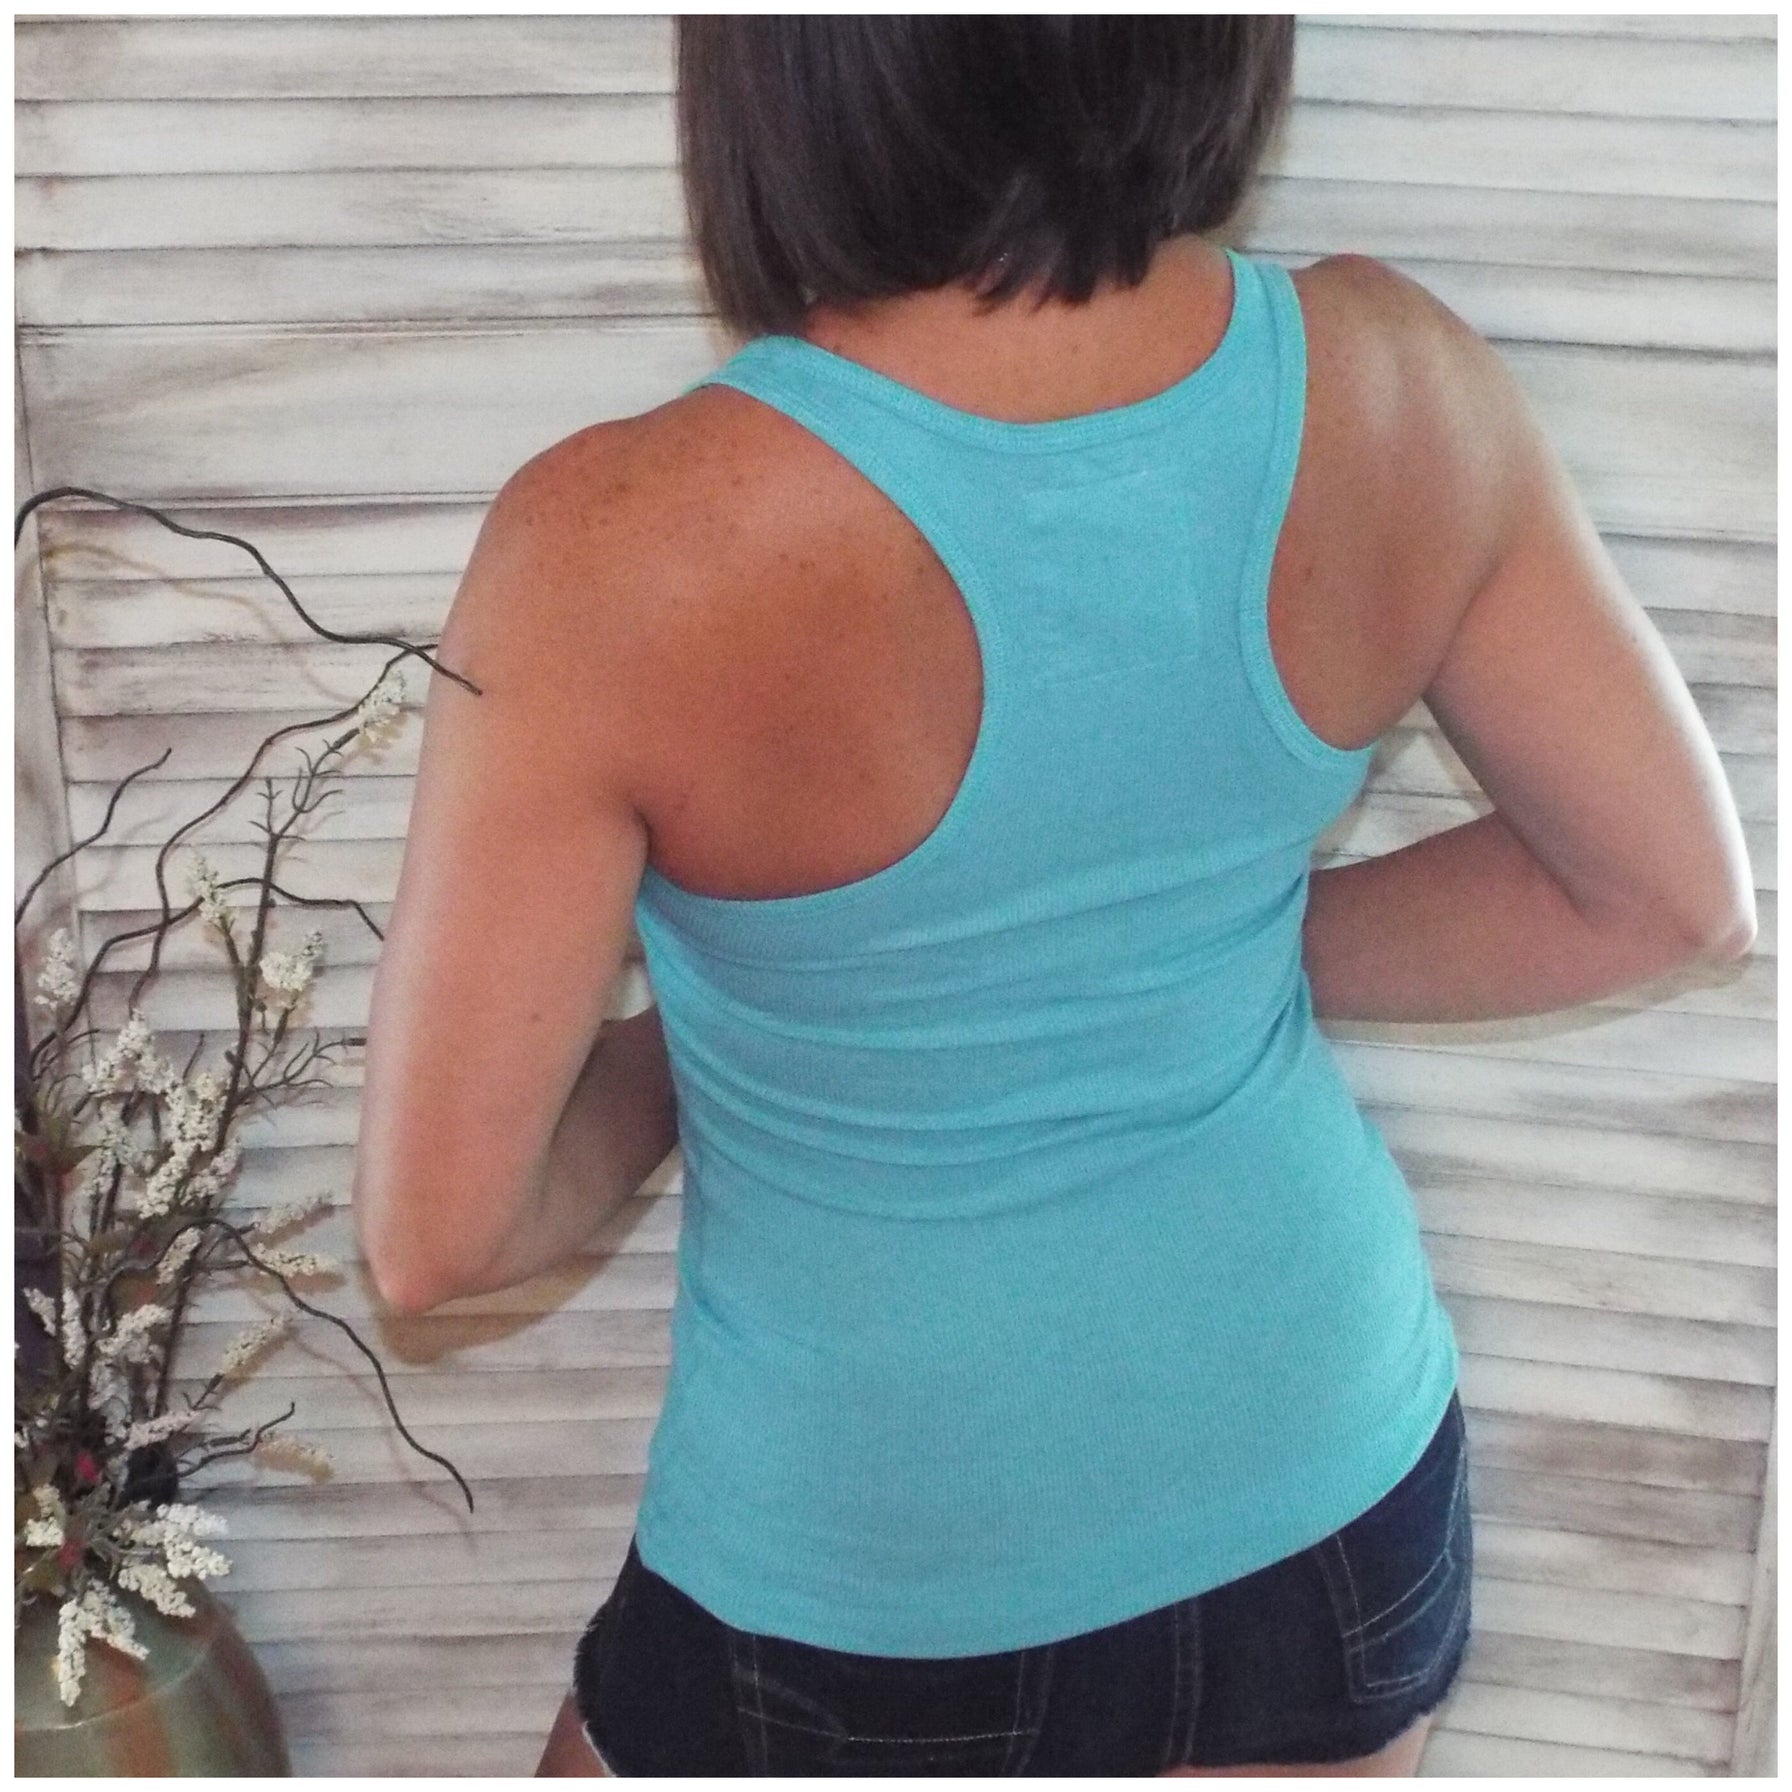 "Can't Touch This" Ribbed Racerback Low Scoop Boy Beater Cleavage Tank Top Dark Mint S/M/L/XL